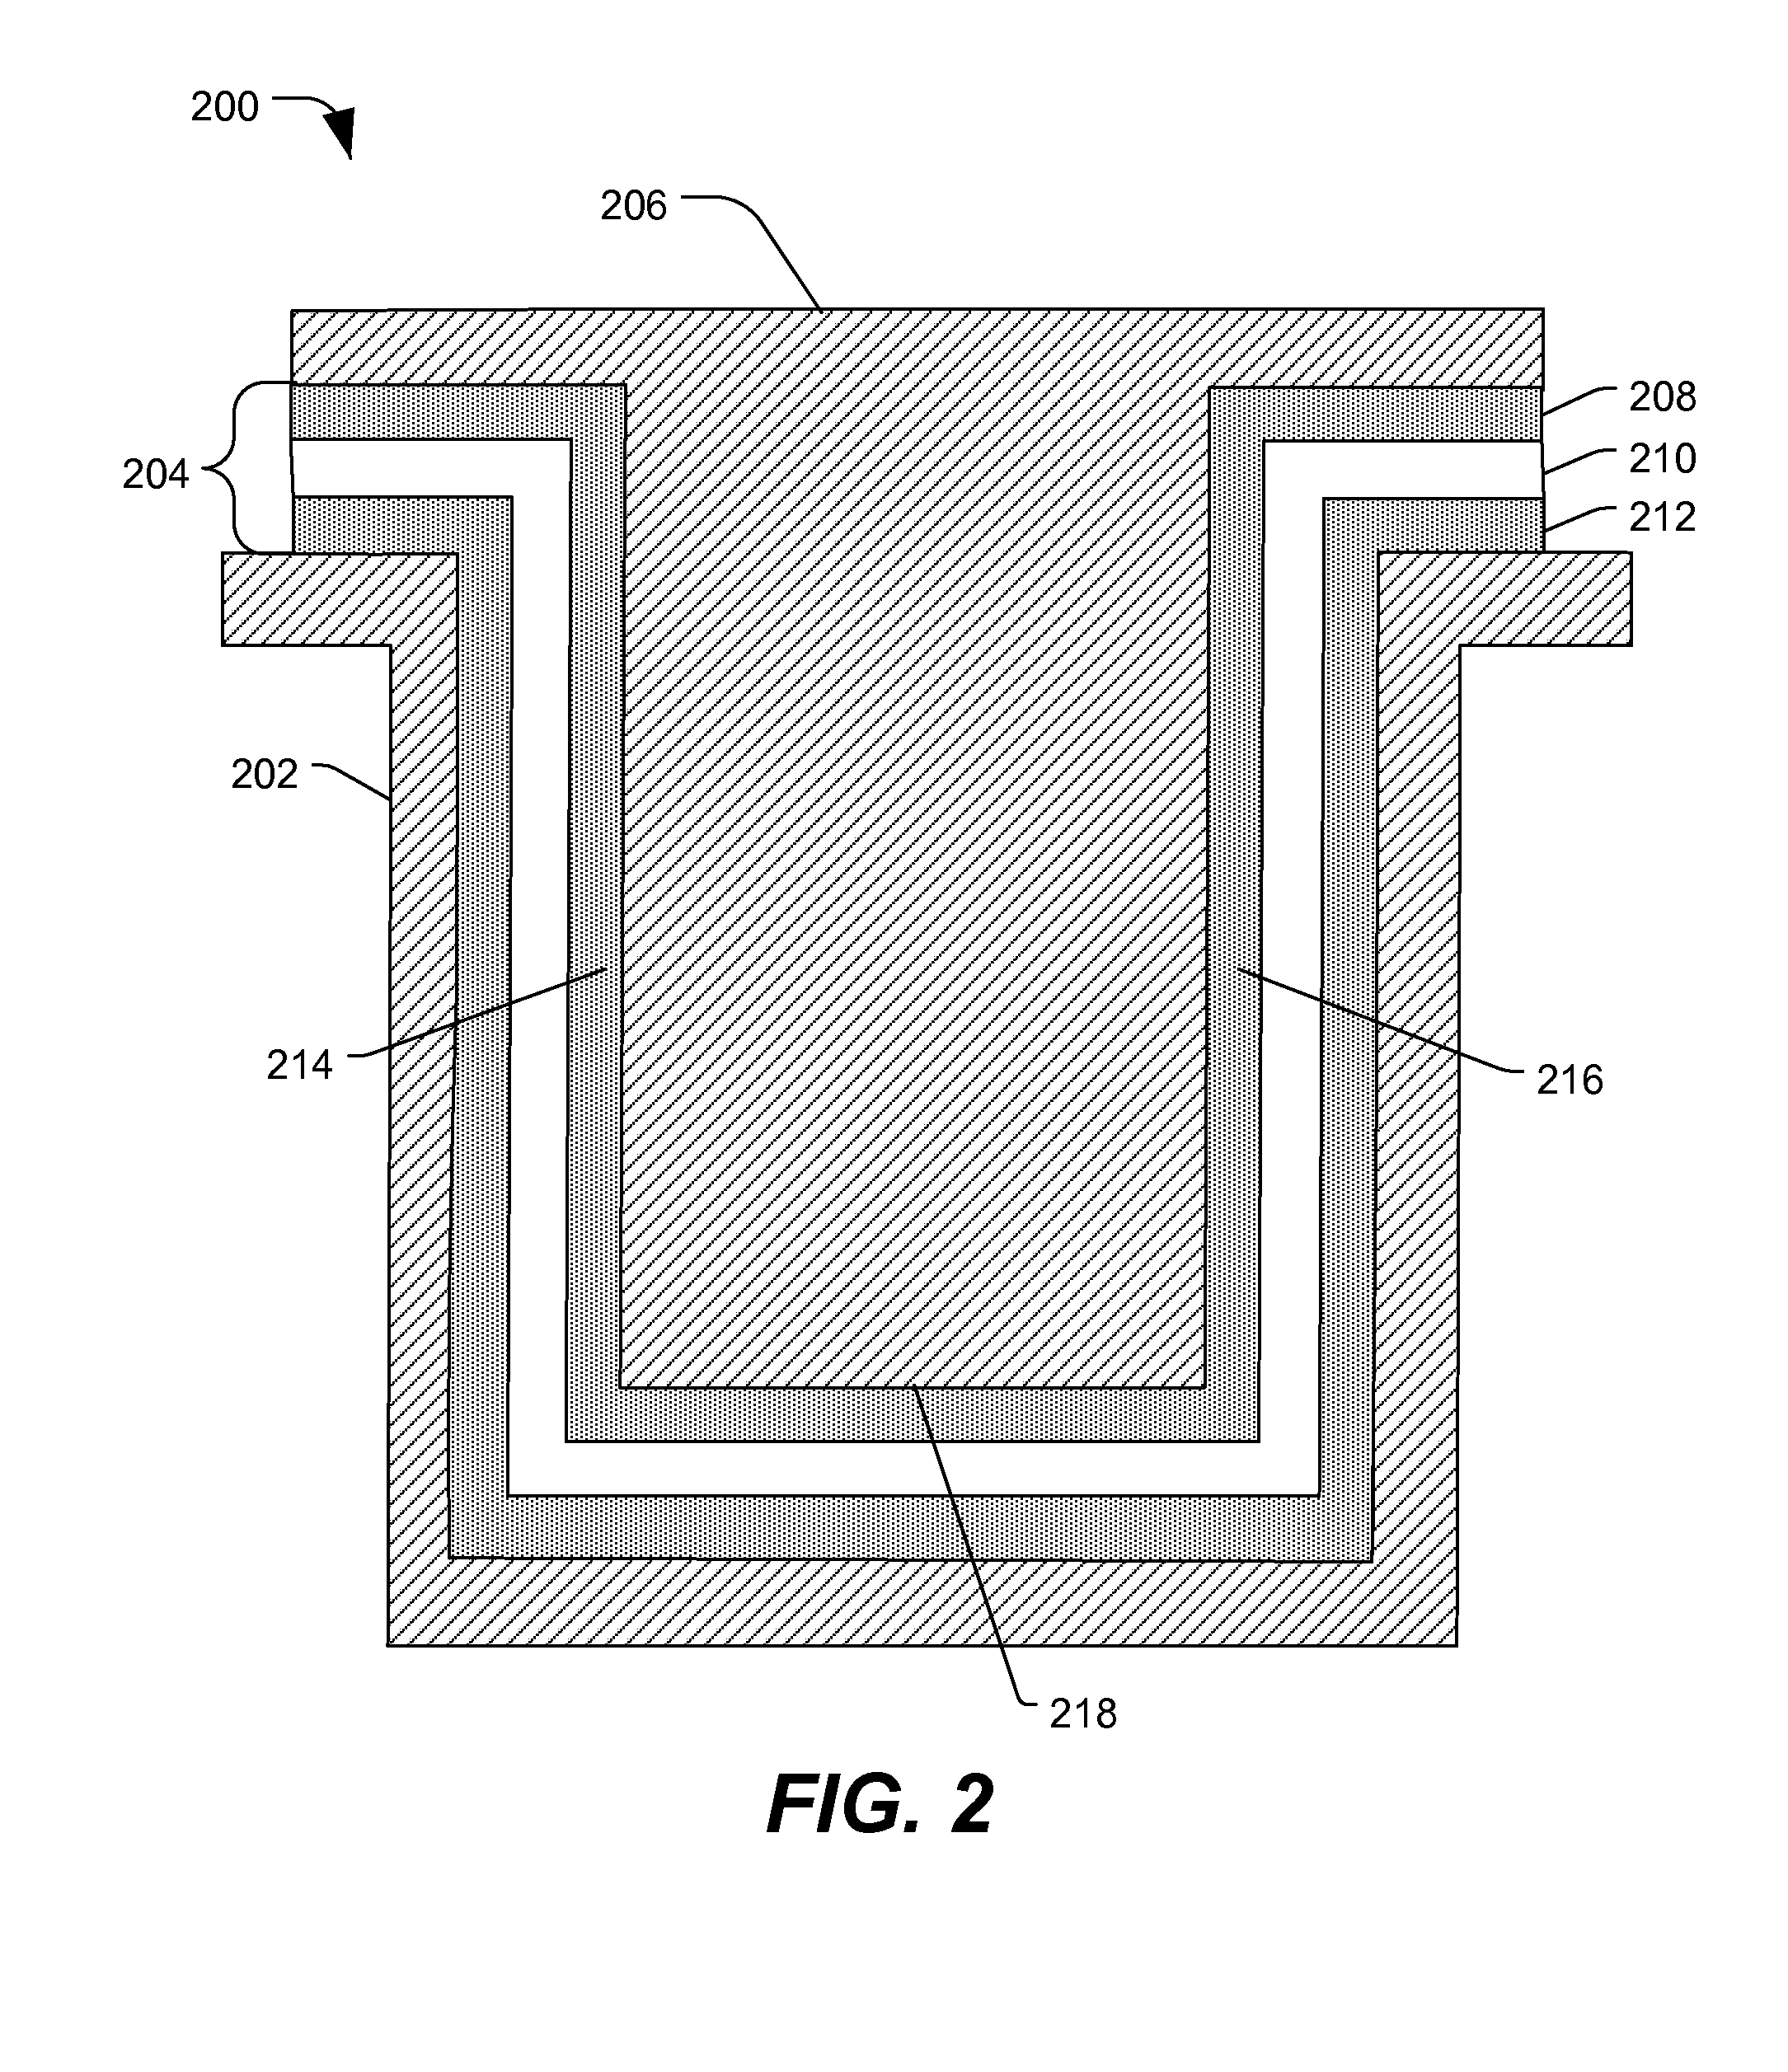 Magnetic Tunnel Junction Cell Including Multiple Vertical Magnetic Domains